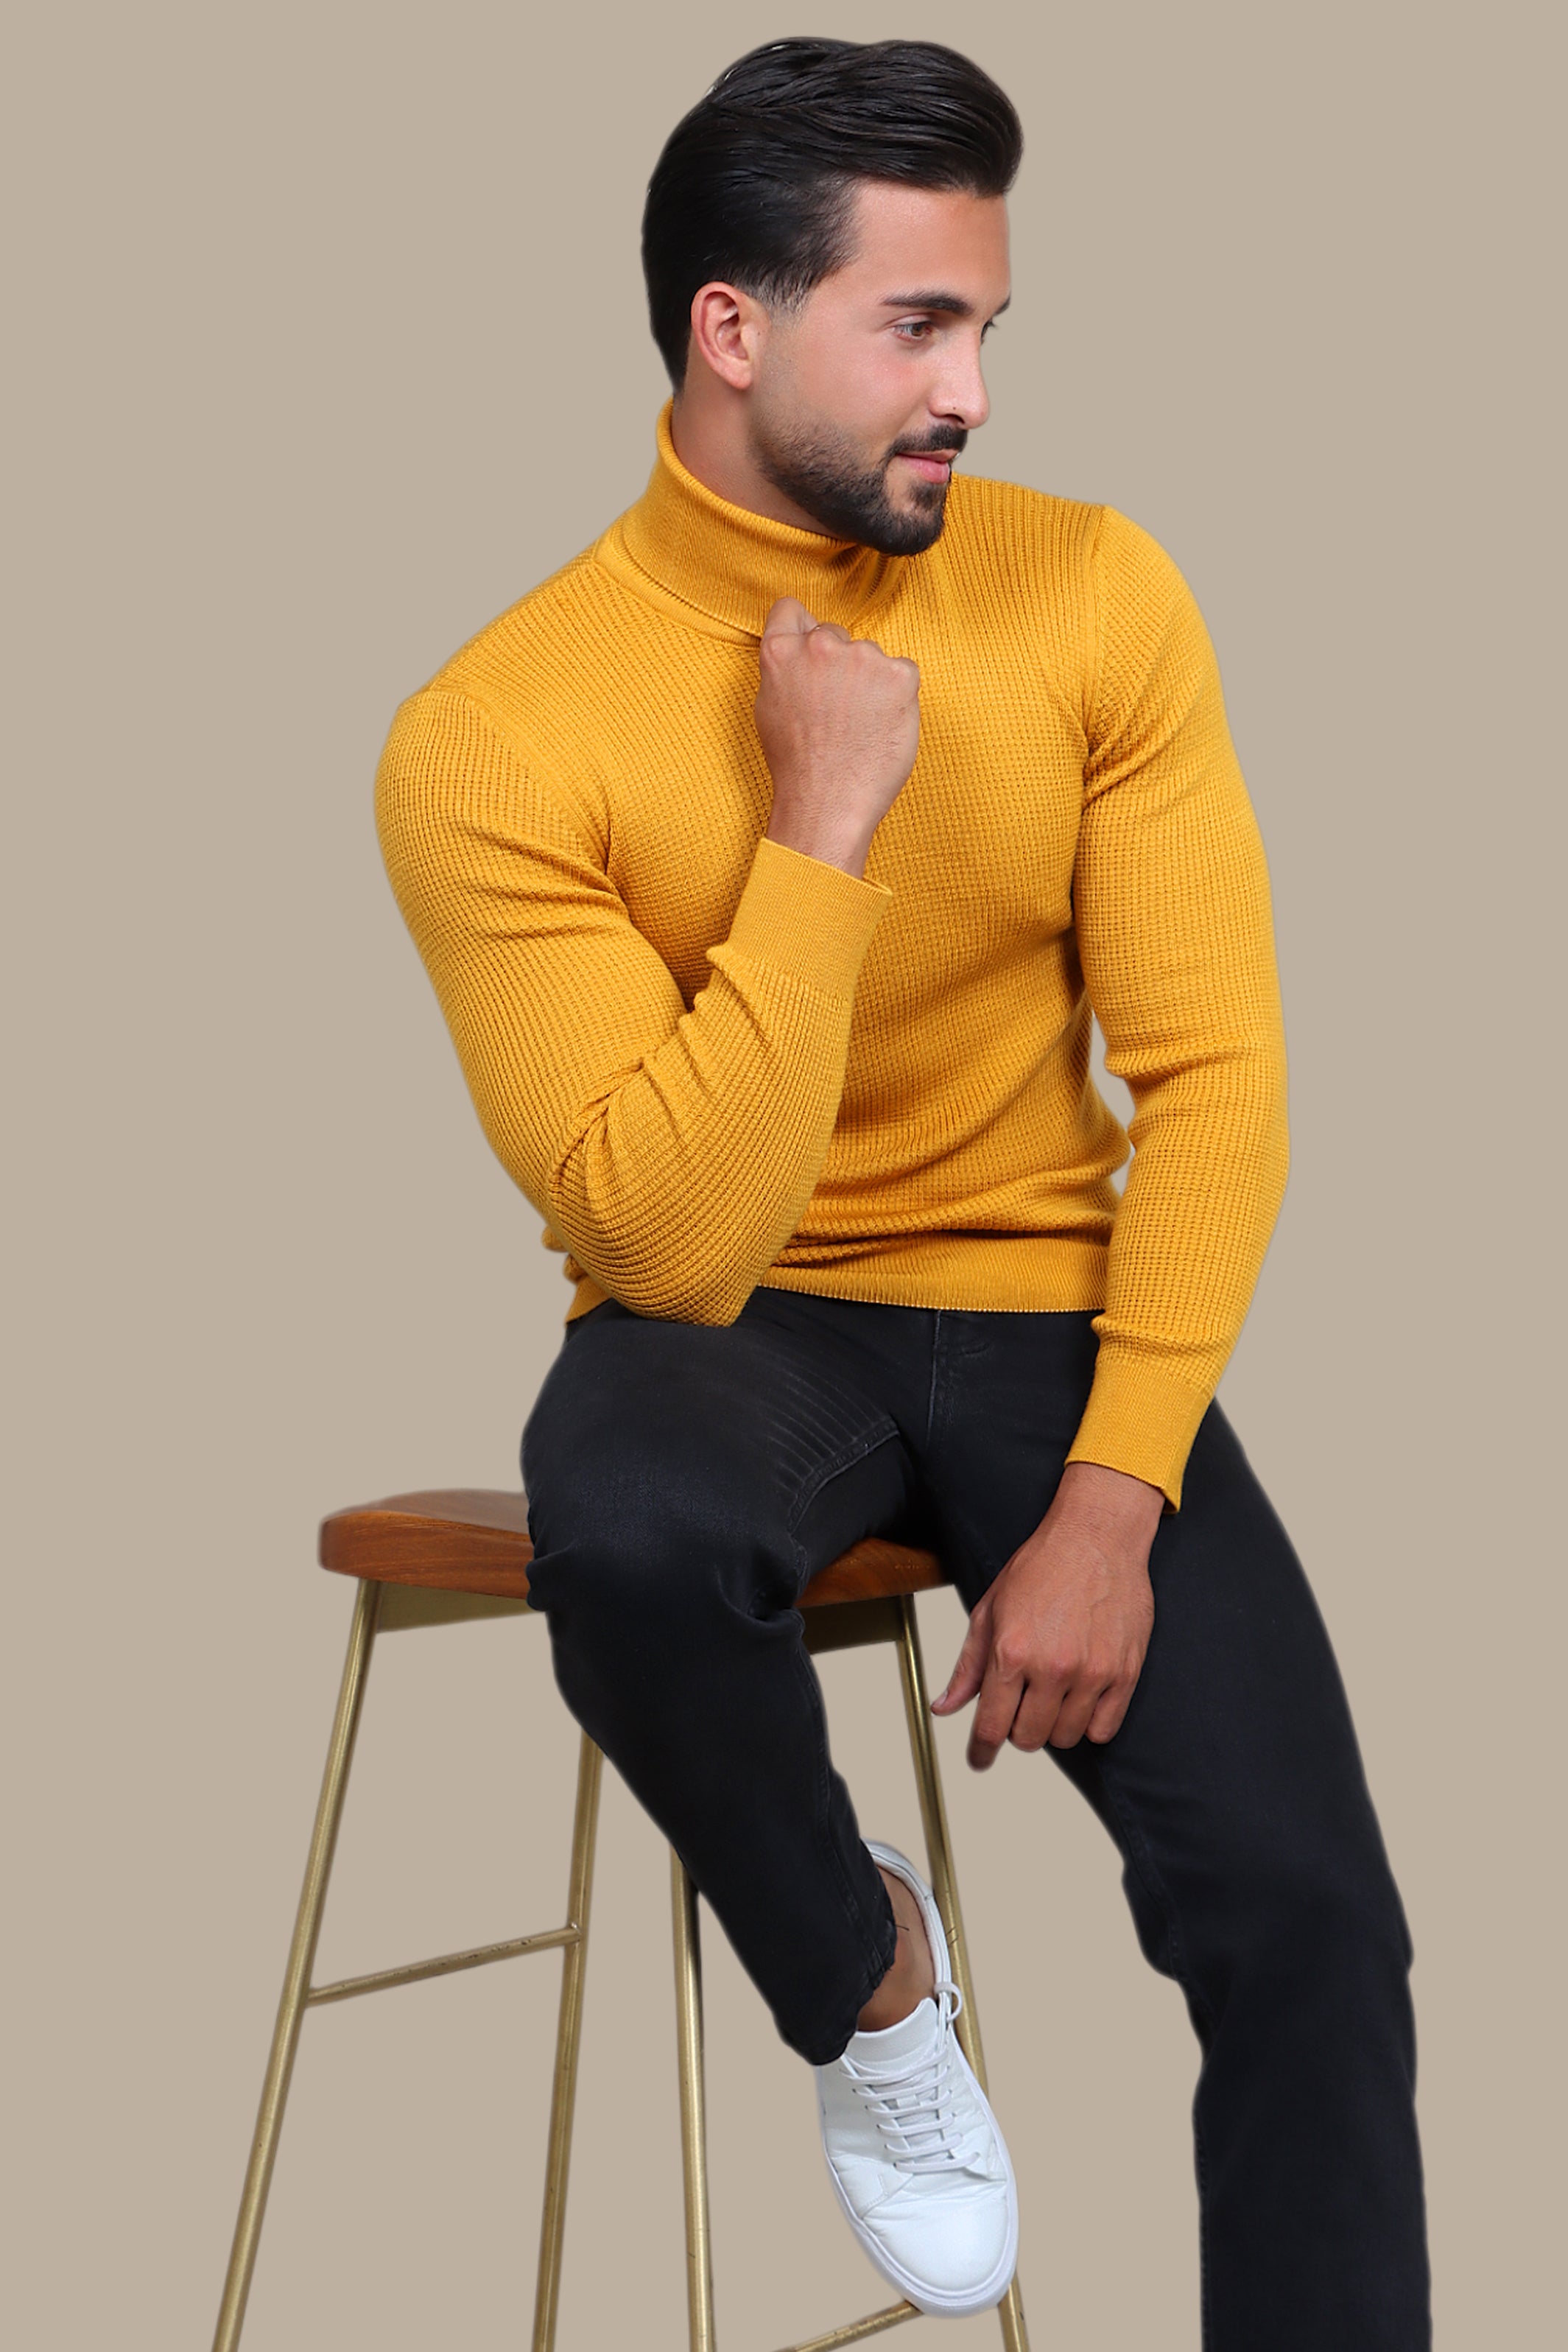 Mustard Turtle Neck Structured Sweater: A Cozy Must-Have